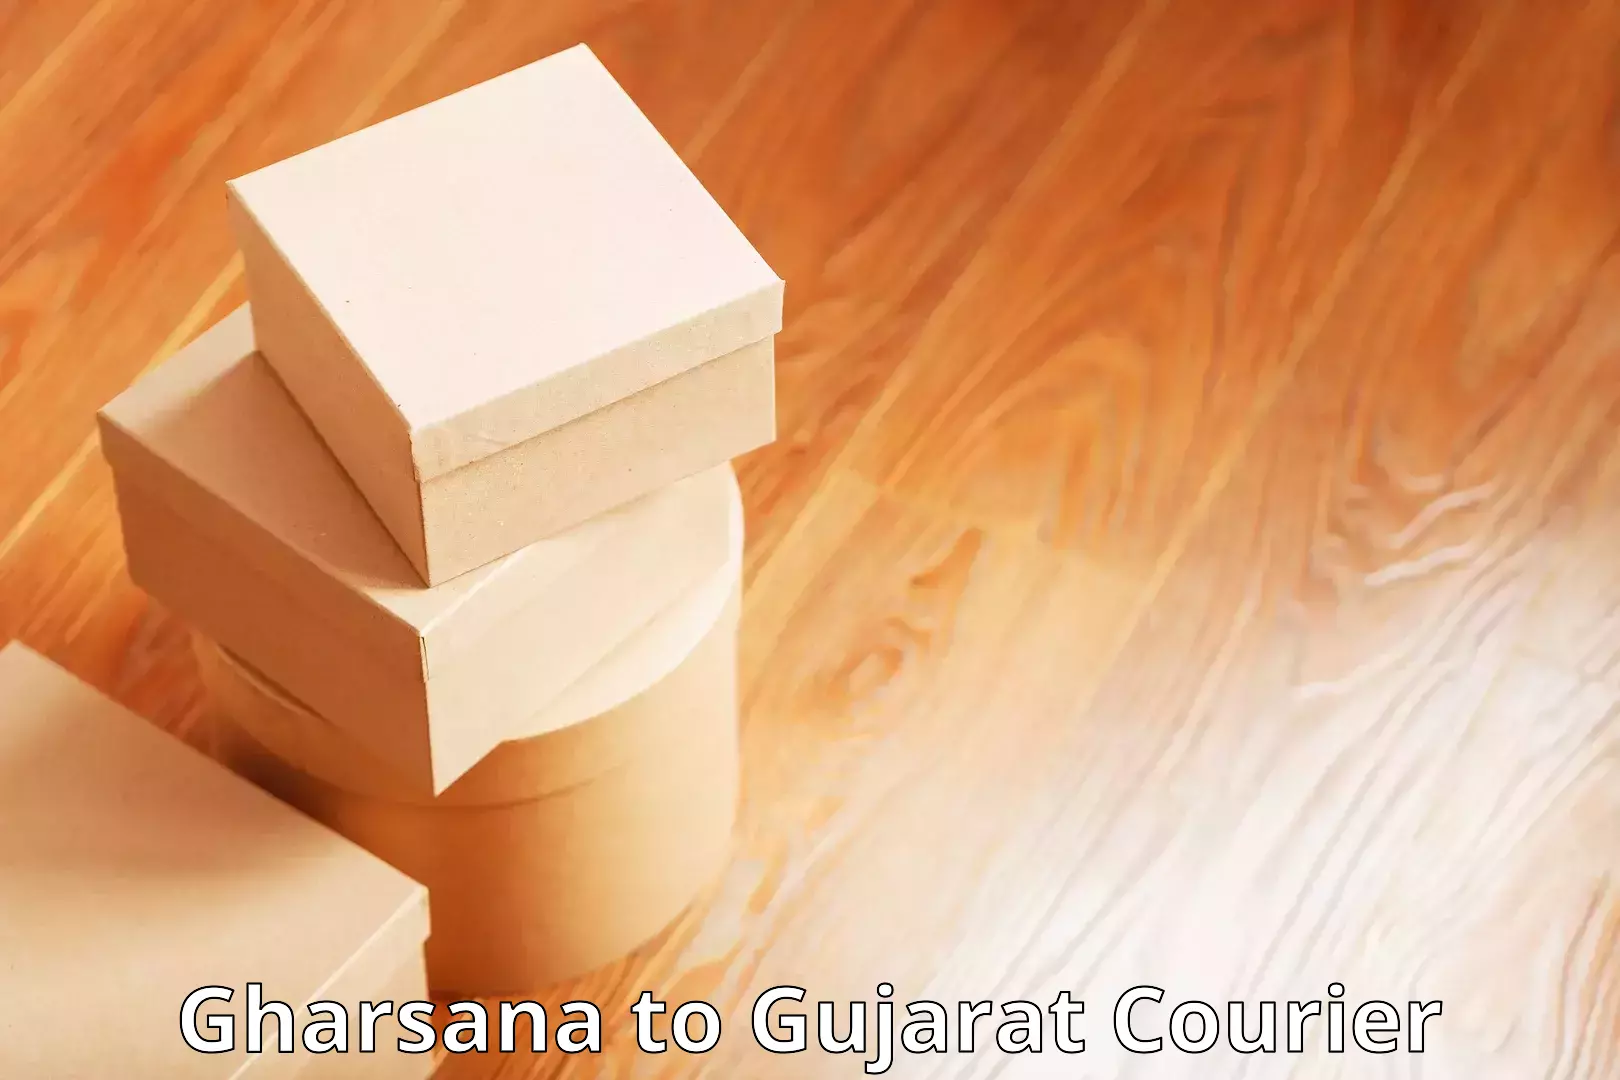 State-of-the-art courier technology Gharsana to Mandvi